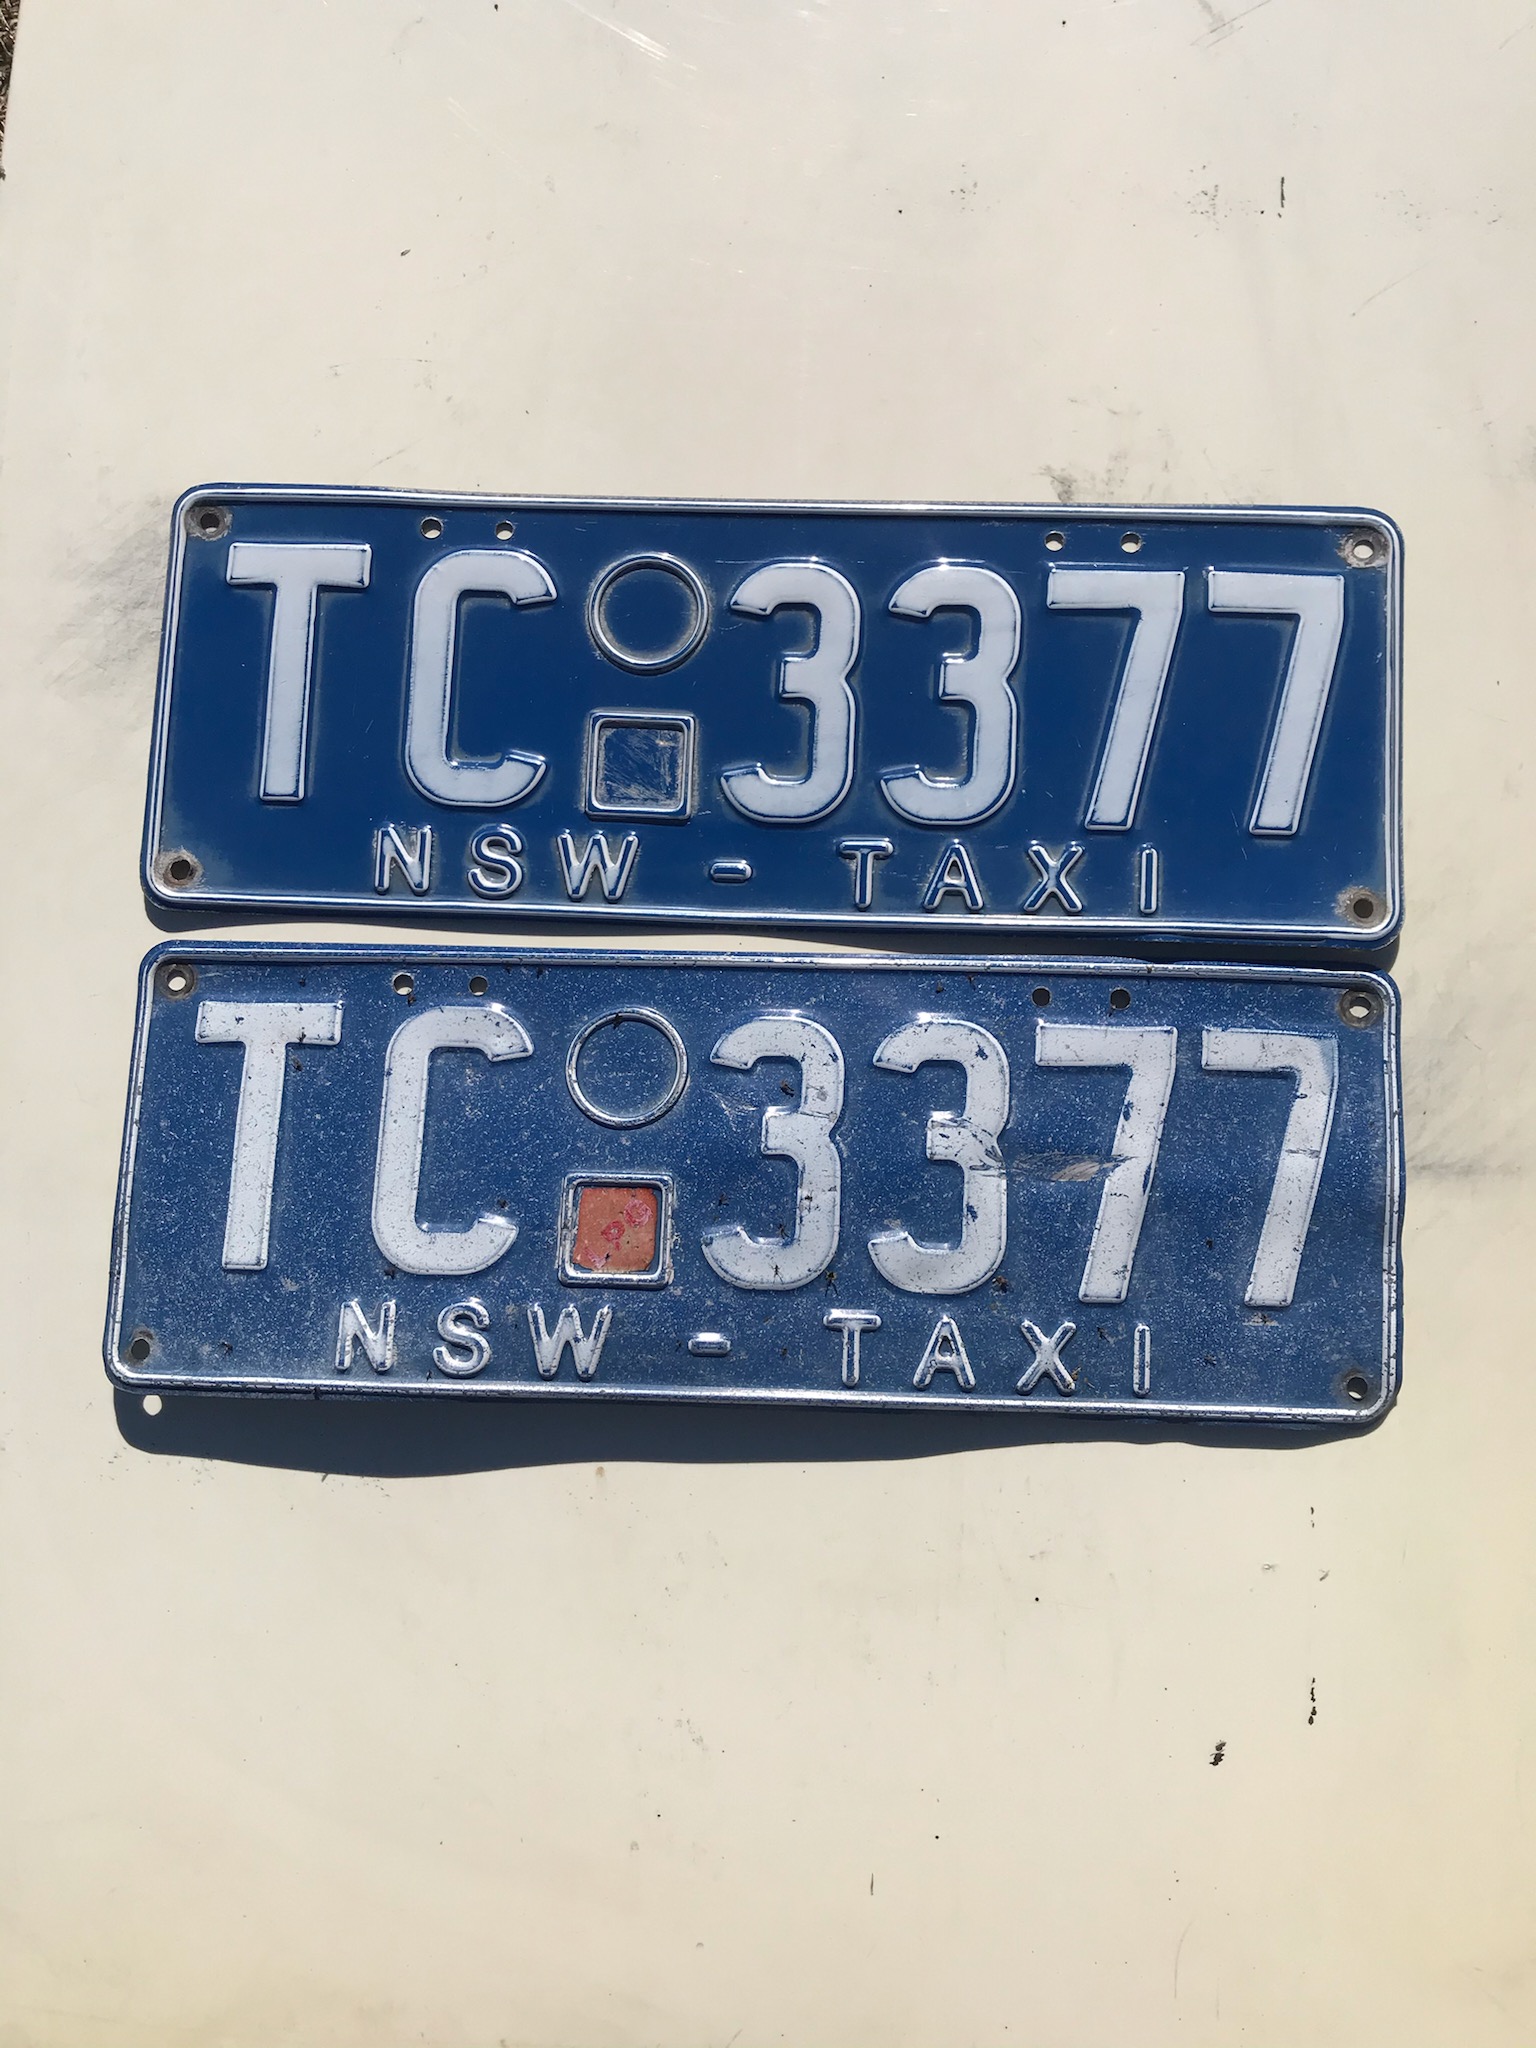 TWO TAXIS PLATES - $50,000 eachBusiness For Sale